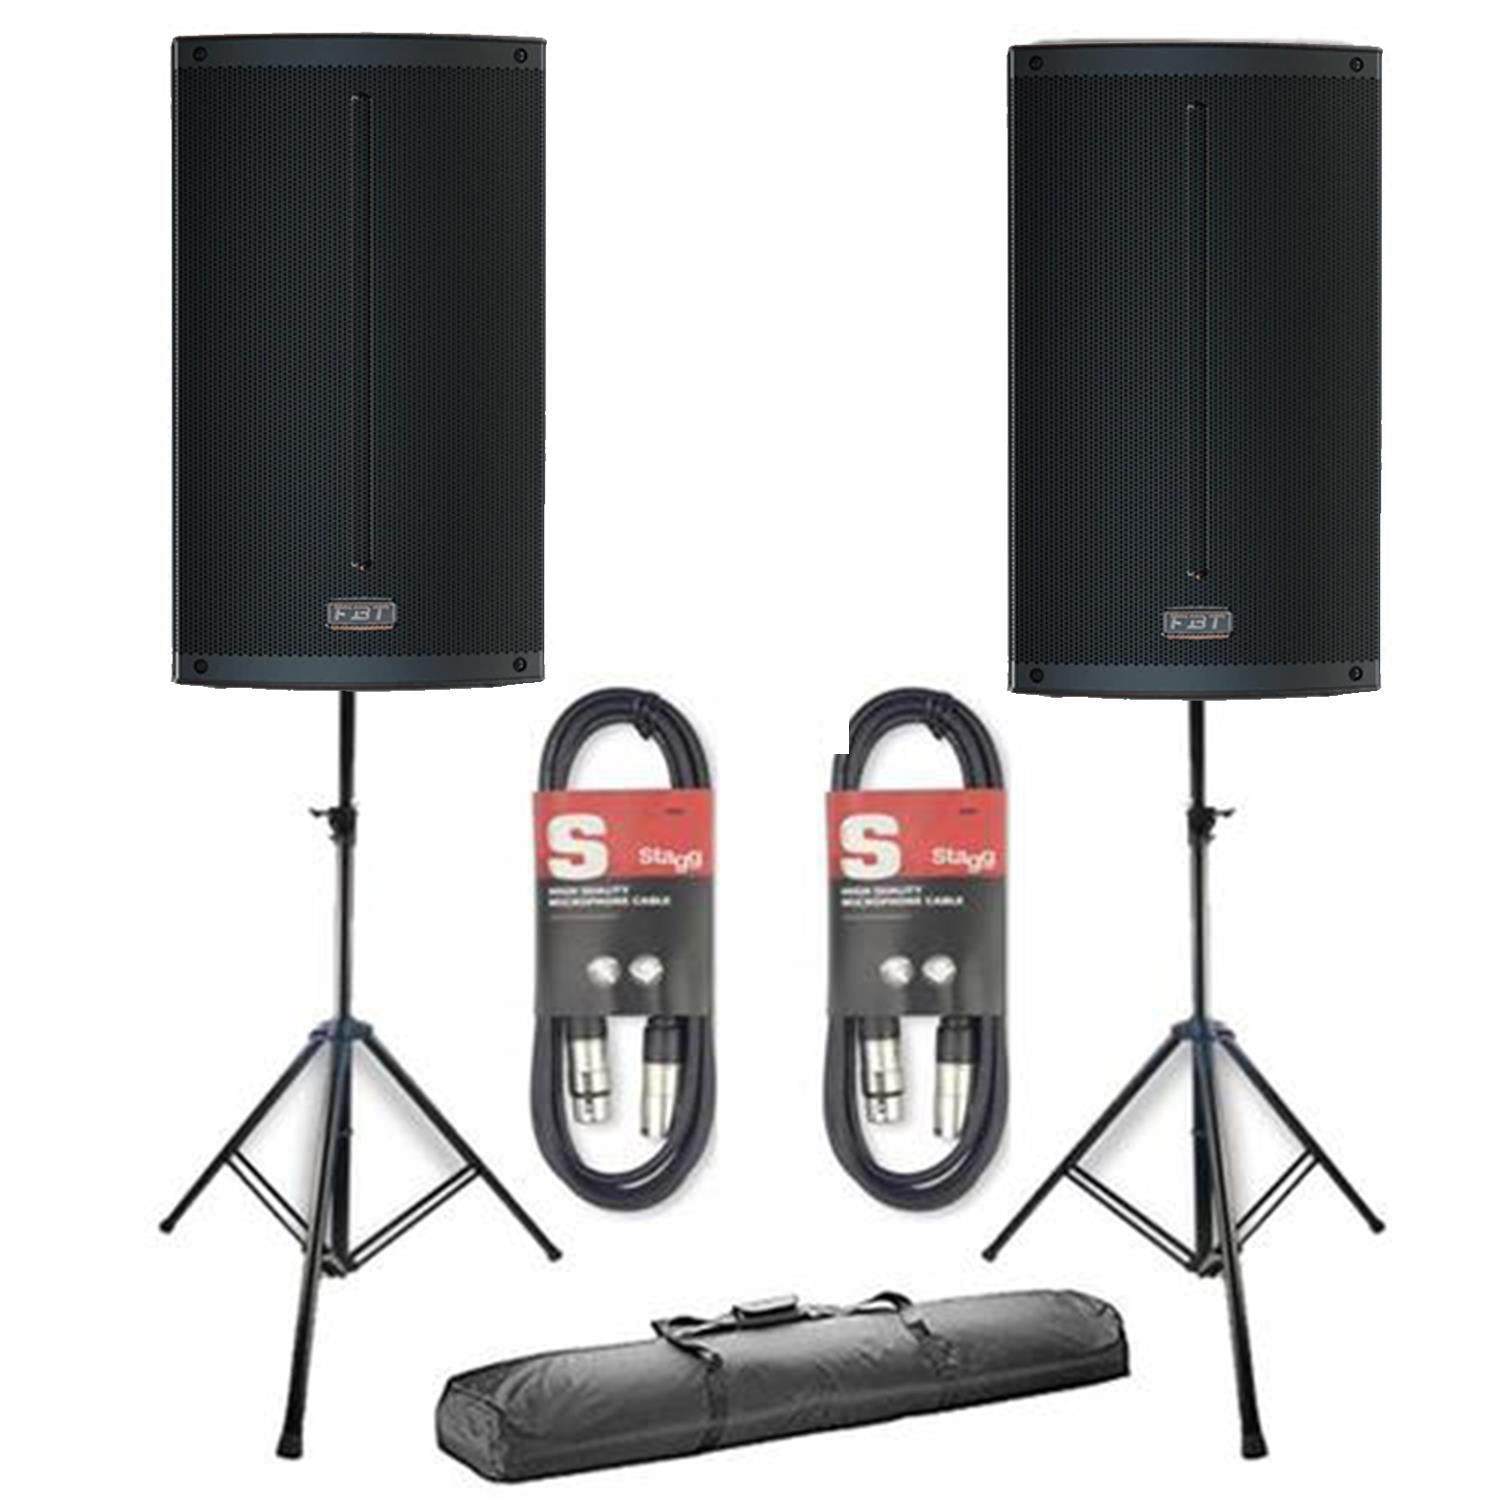 2 x FBT X-Lite 115A with Stands & Cables - DY Pro Audio